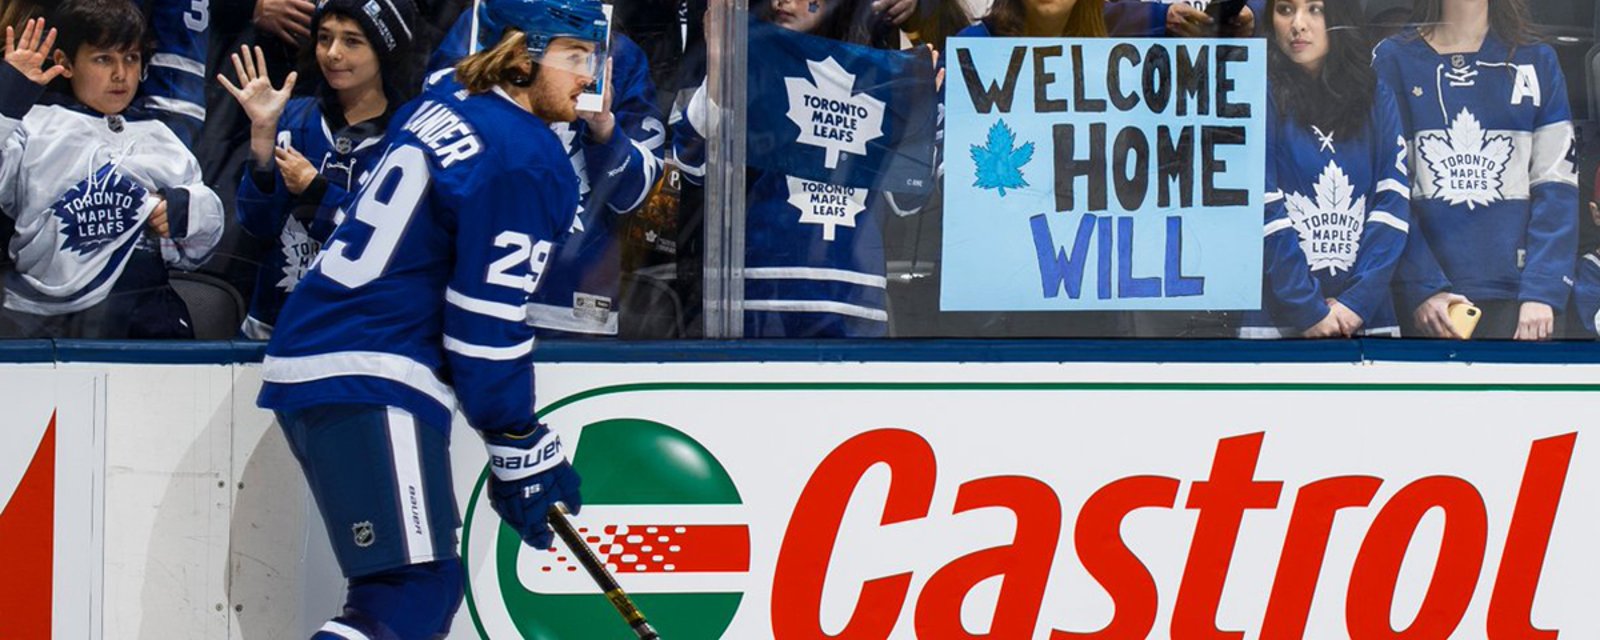 Nylander gets booed by Leafs crowd in his first game after contract holdout